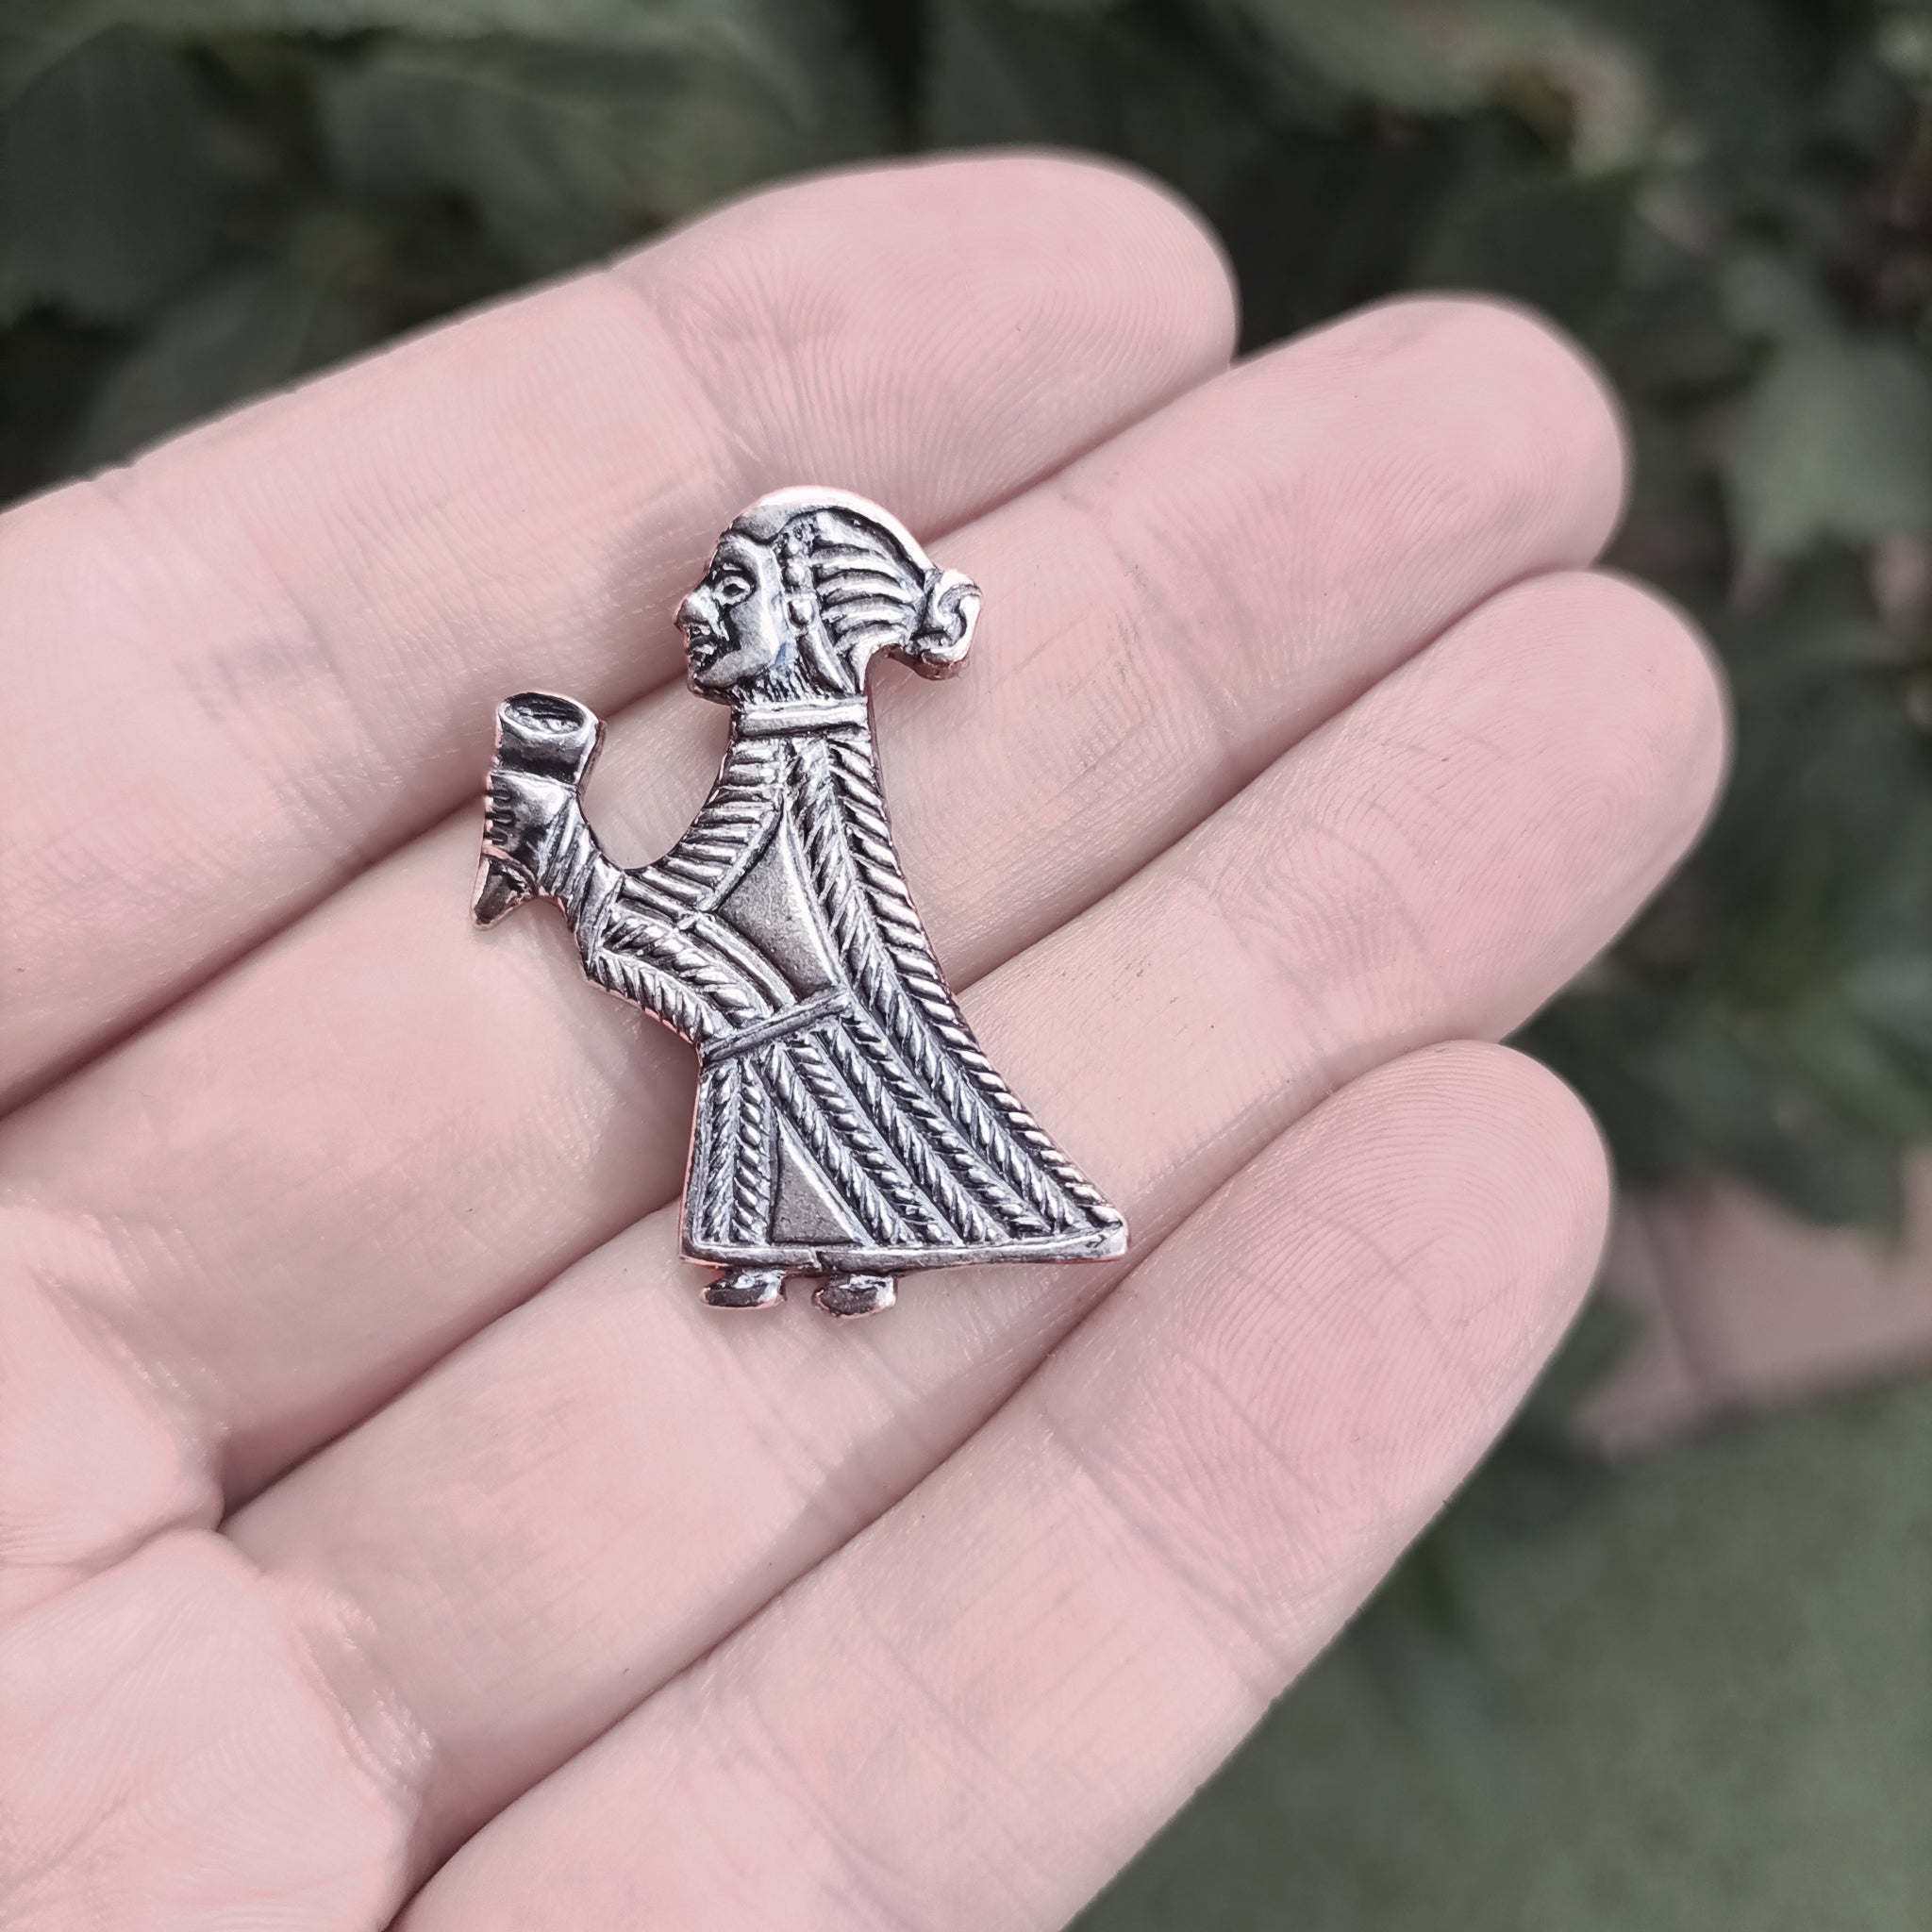 Silver Valkyrie Pendant on Hand 2